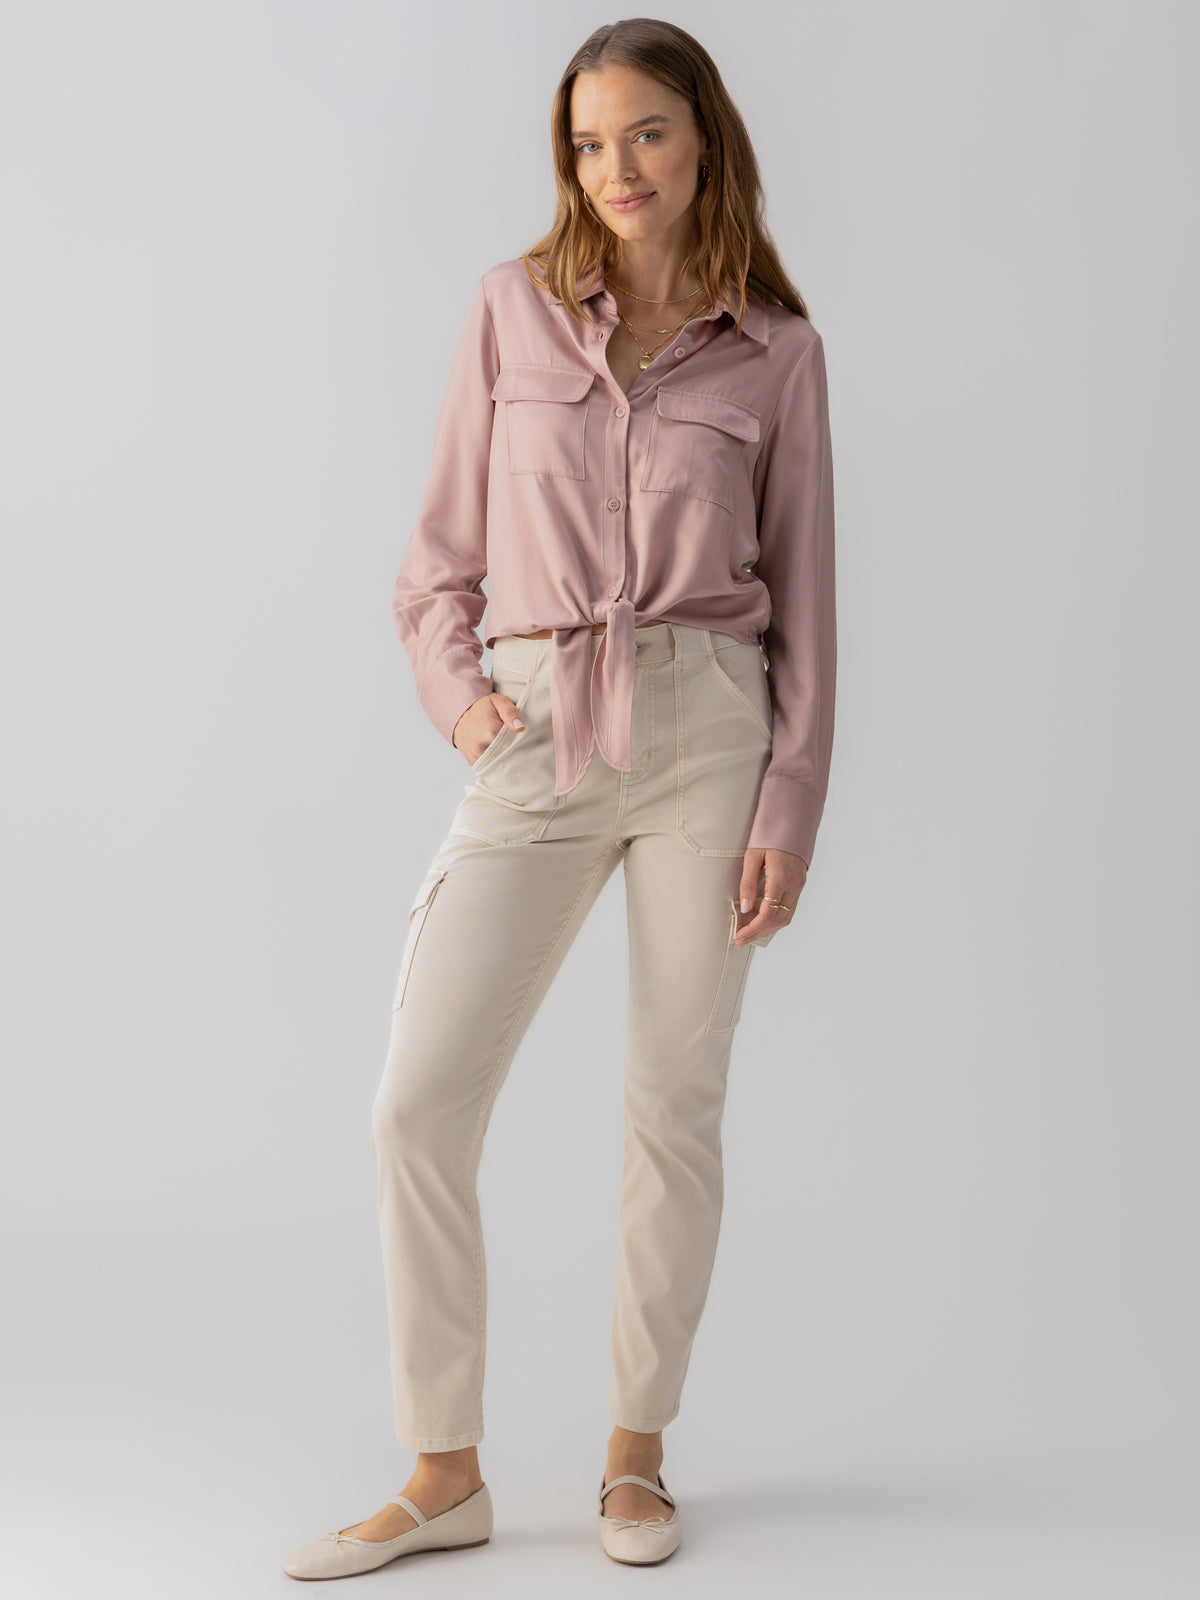 Sculpted Hayden Standard Rise Cargo Pant Toasted Almond